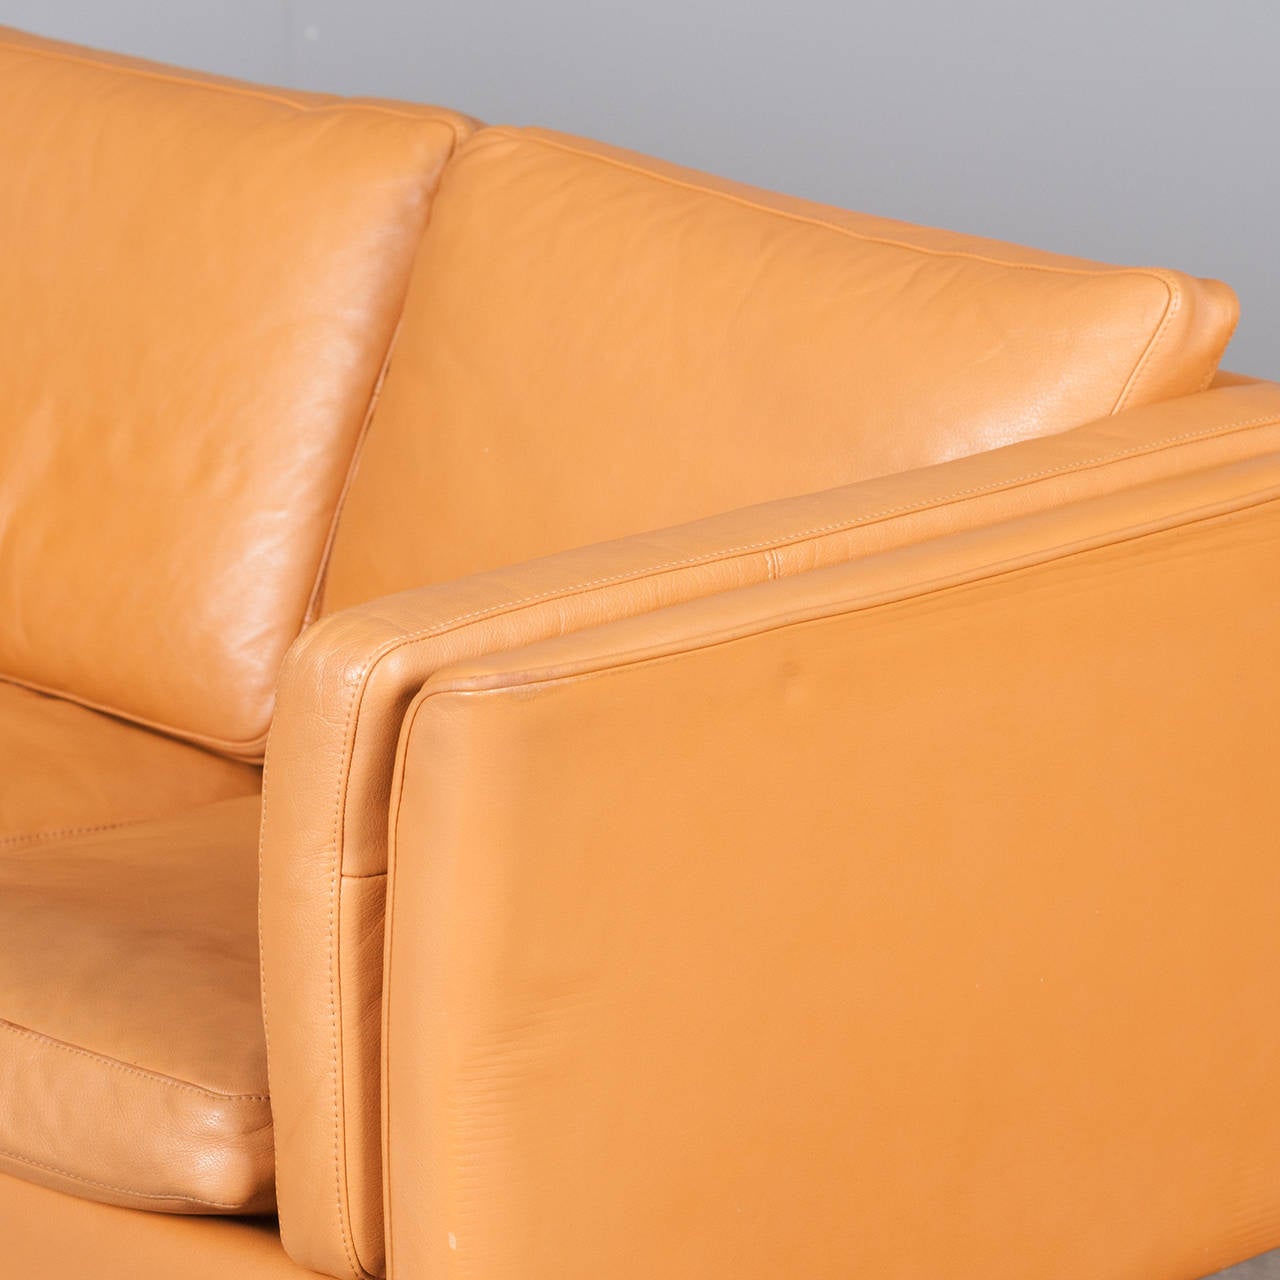 Mid-20th Century Danish Three-Seater Sofa in Honey Tan Leather, 1960s For Sale